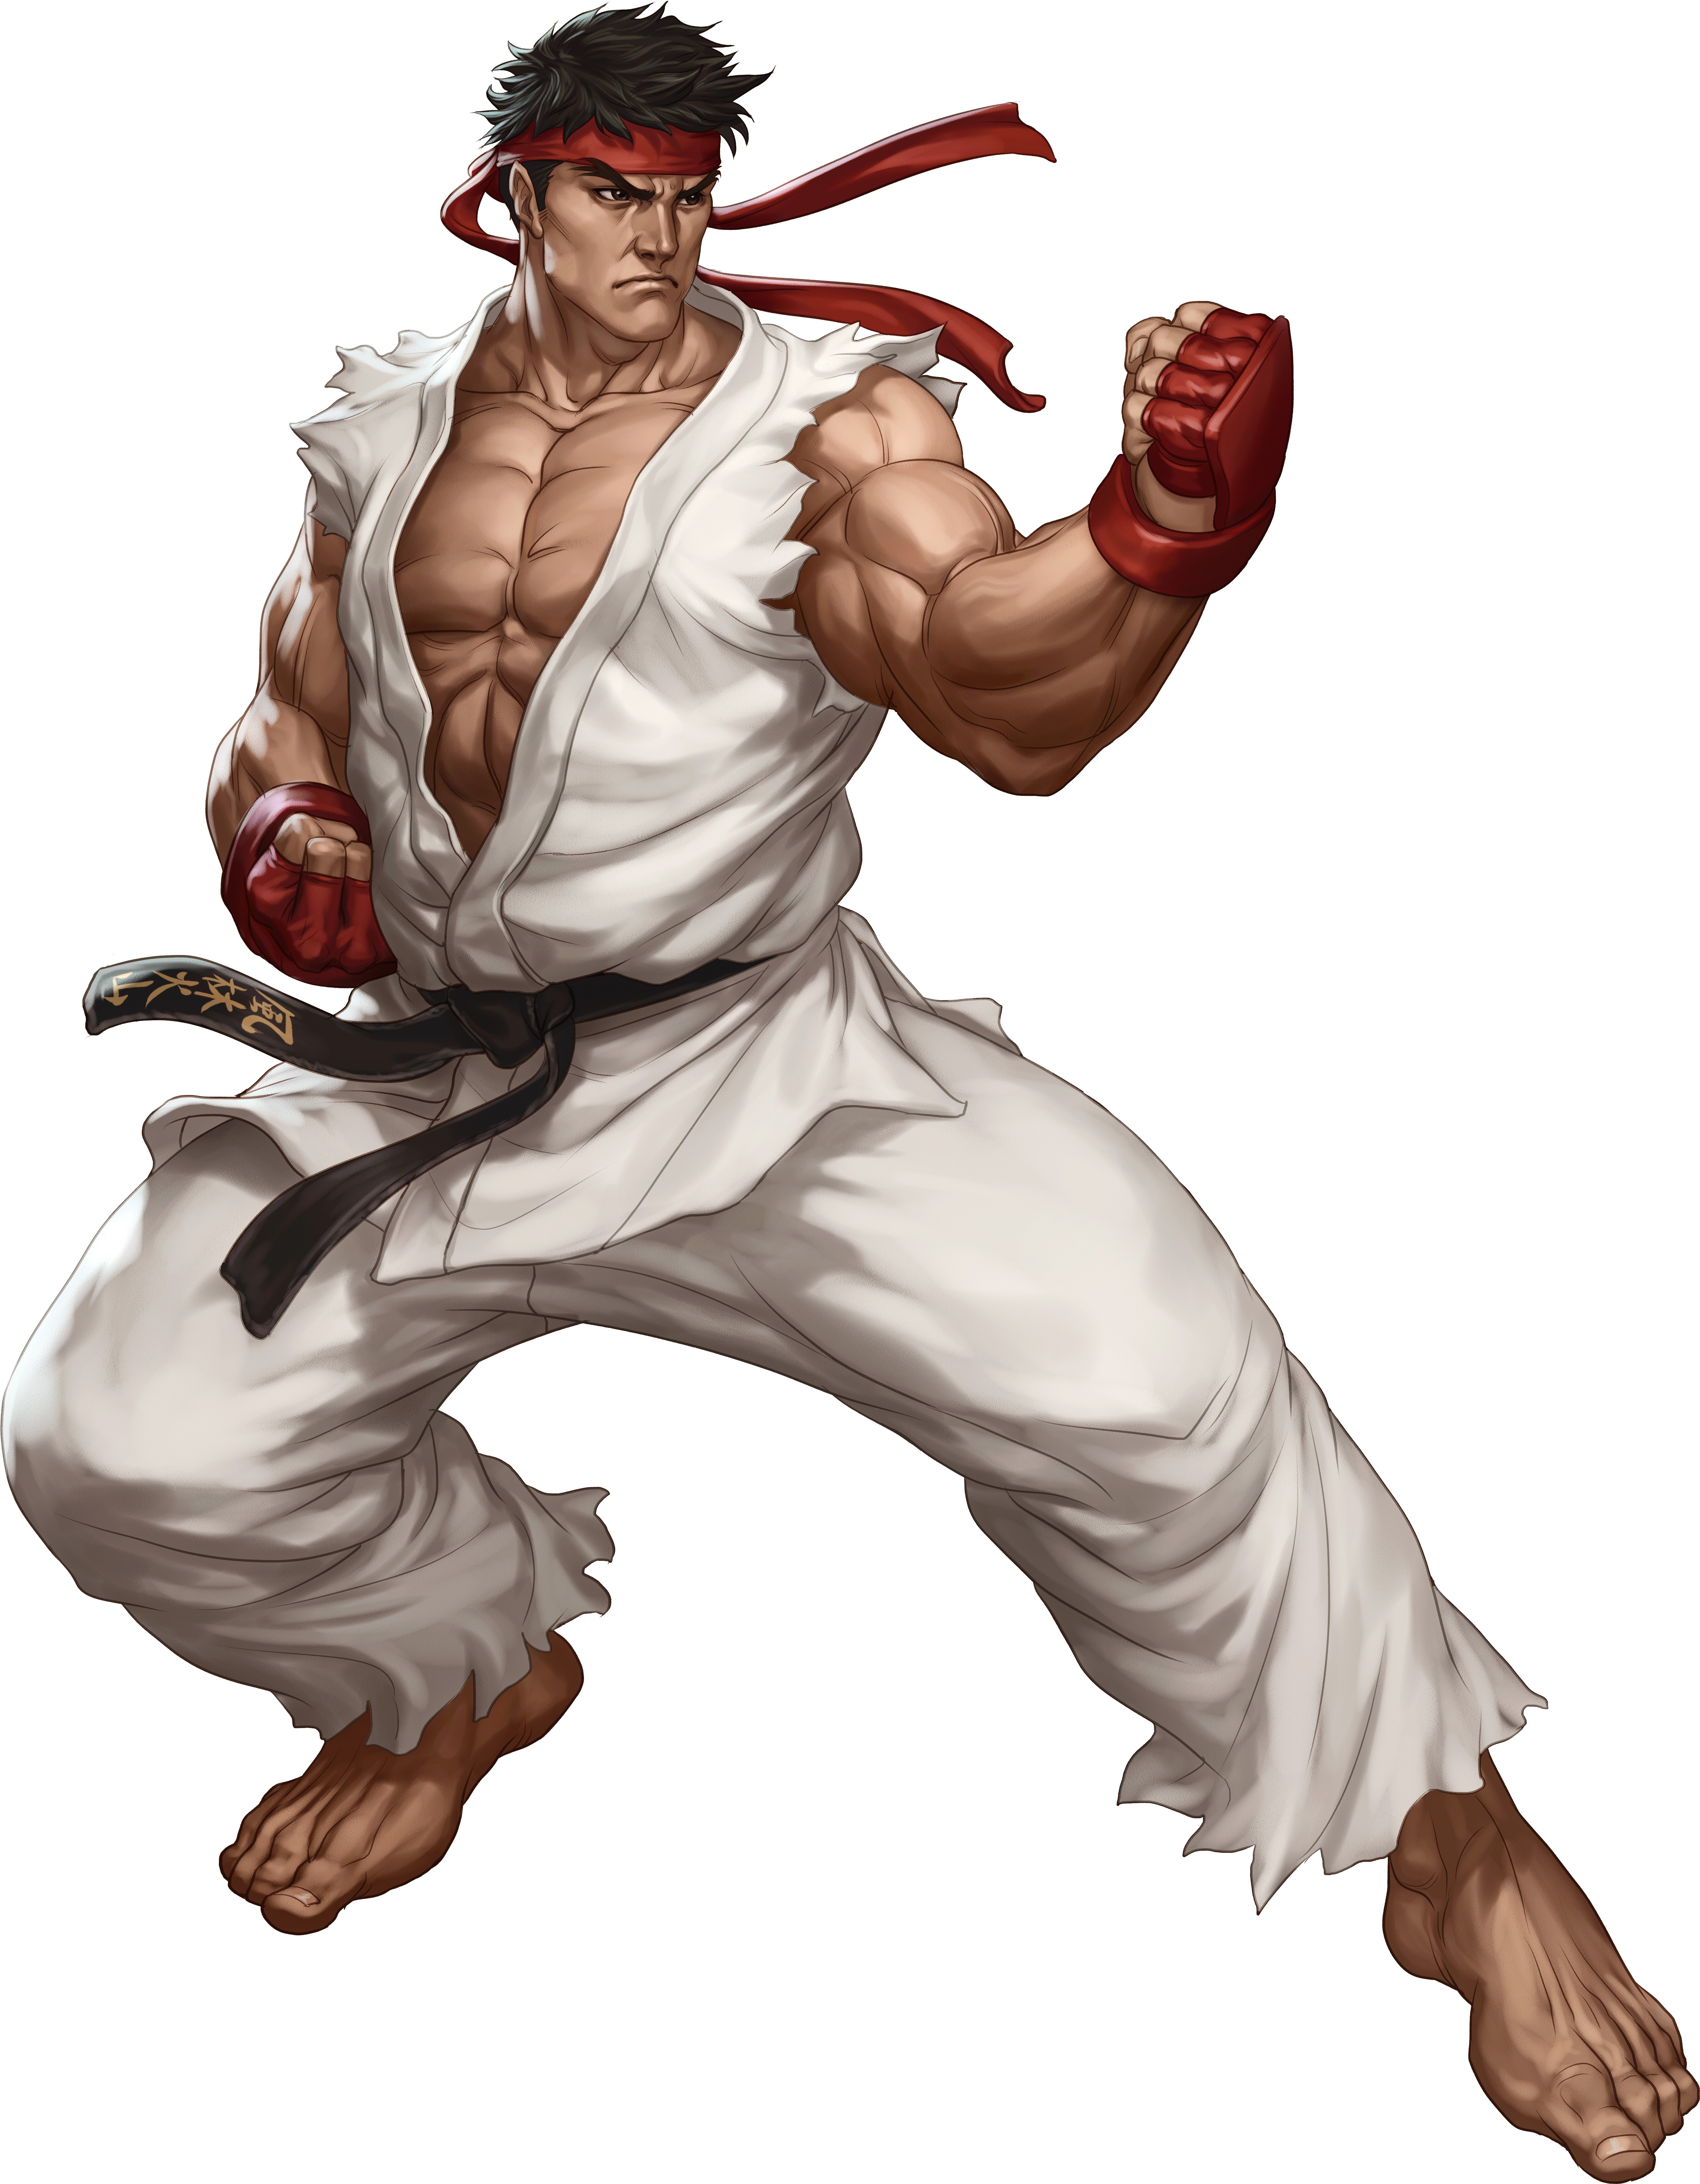 General 5855x7524 Street Fighter warrior Ryu video games white background simple background video game man video game art muscles muscular Ryu (Street Fighter) video game warriors